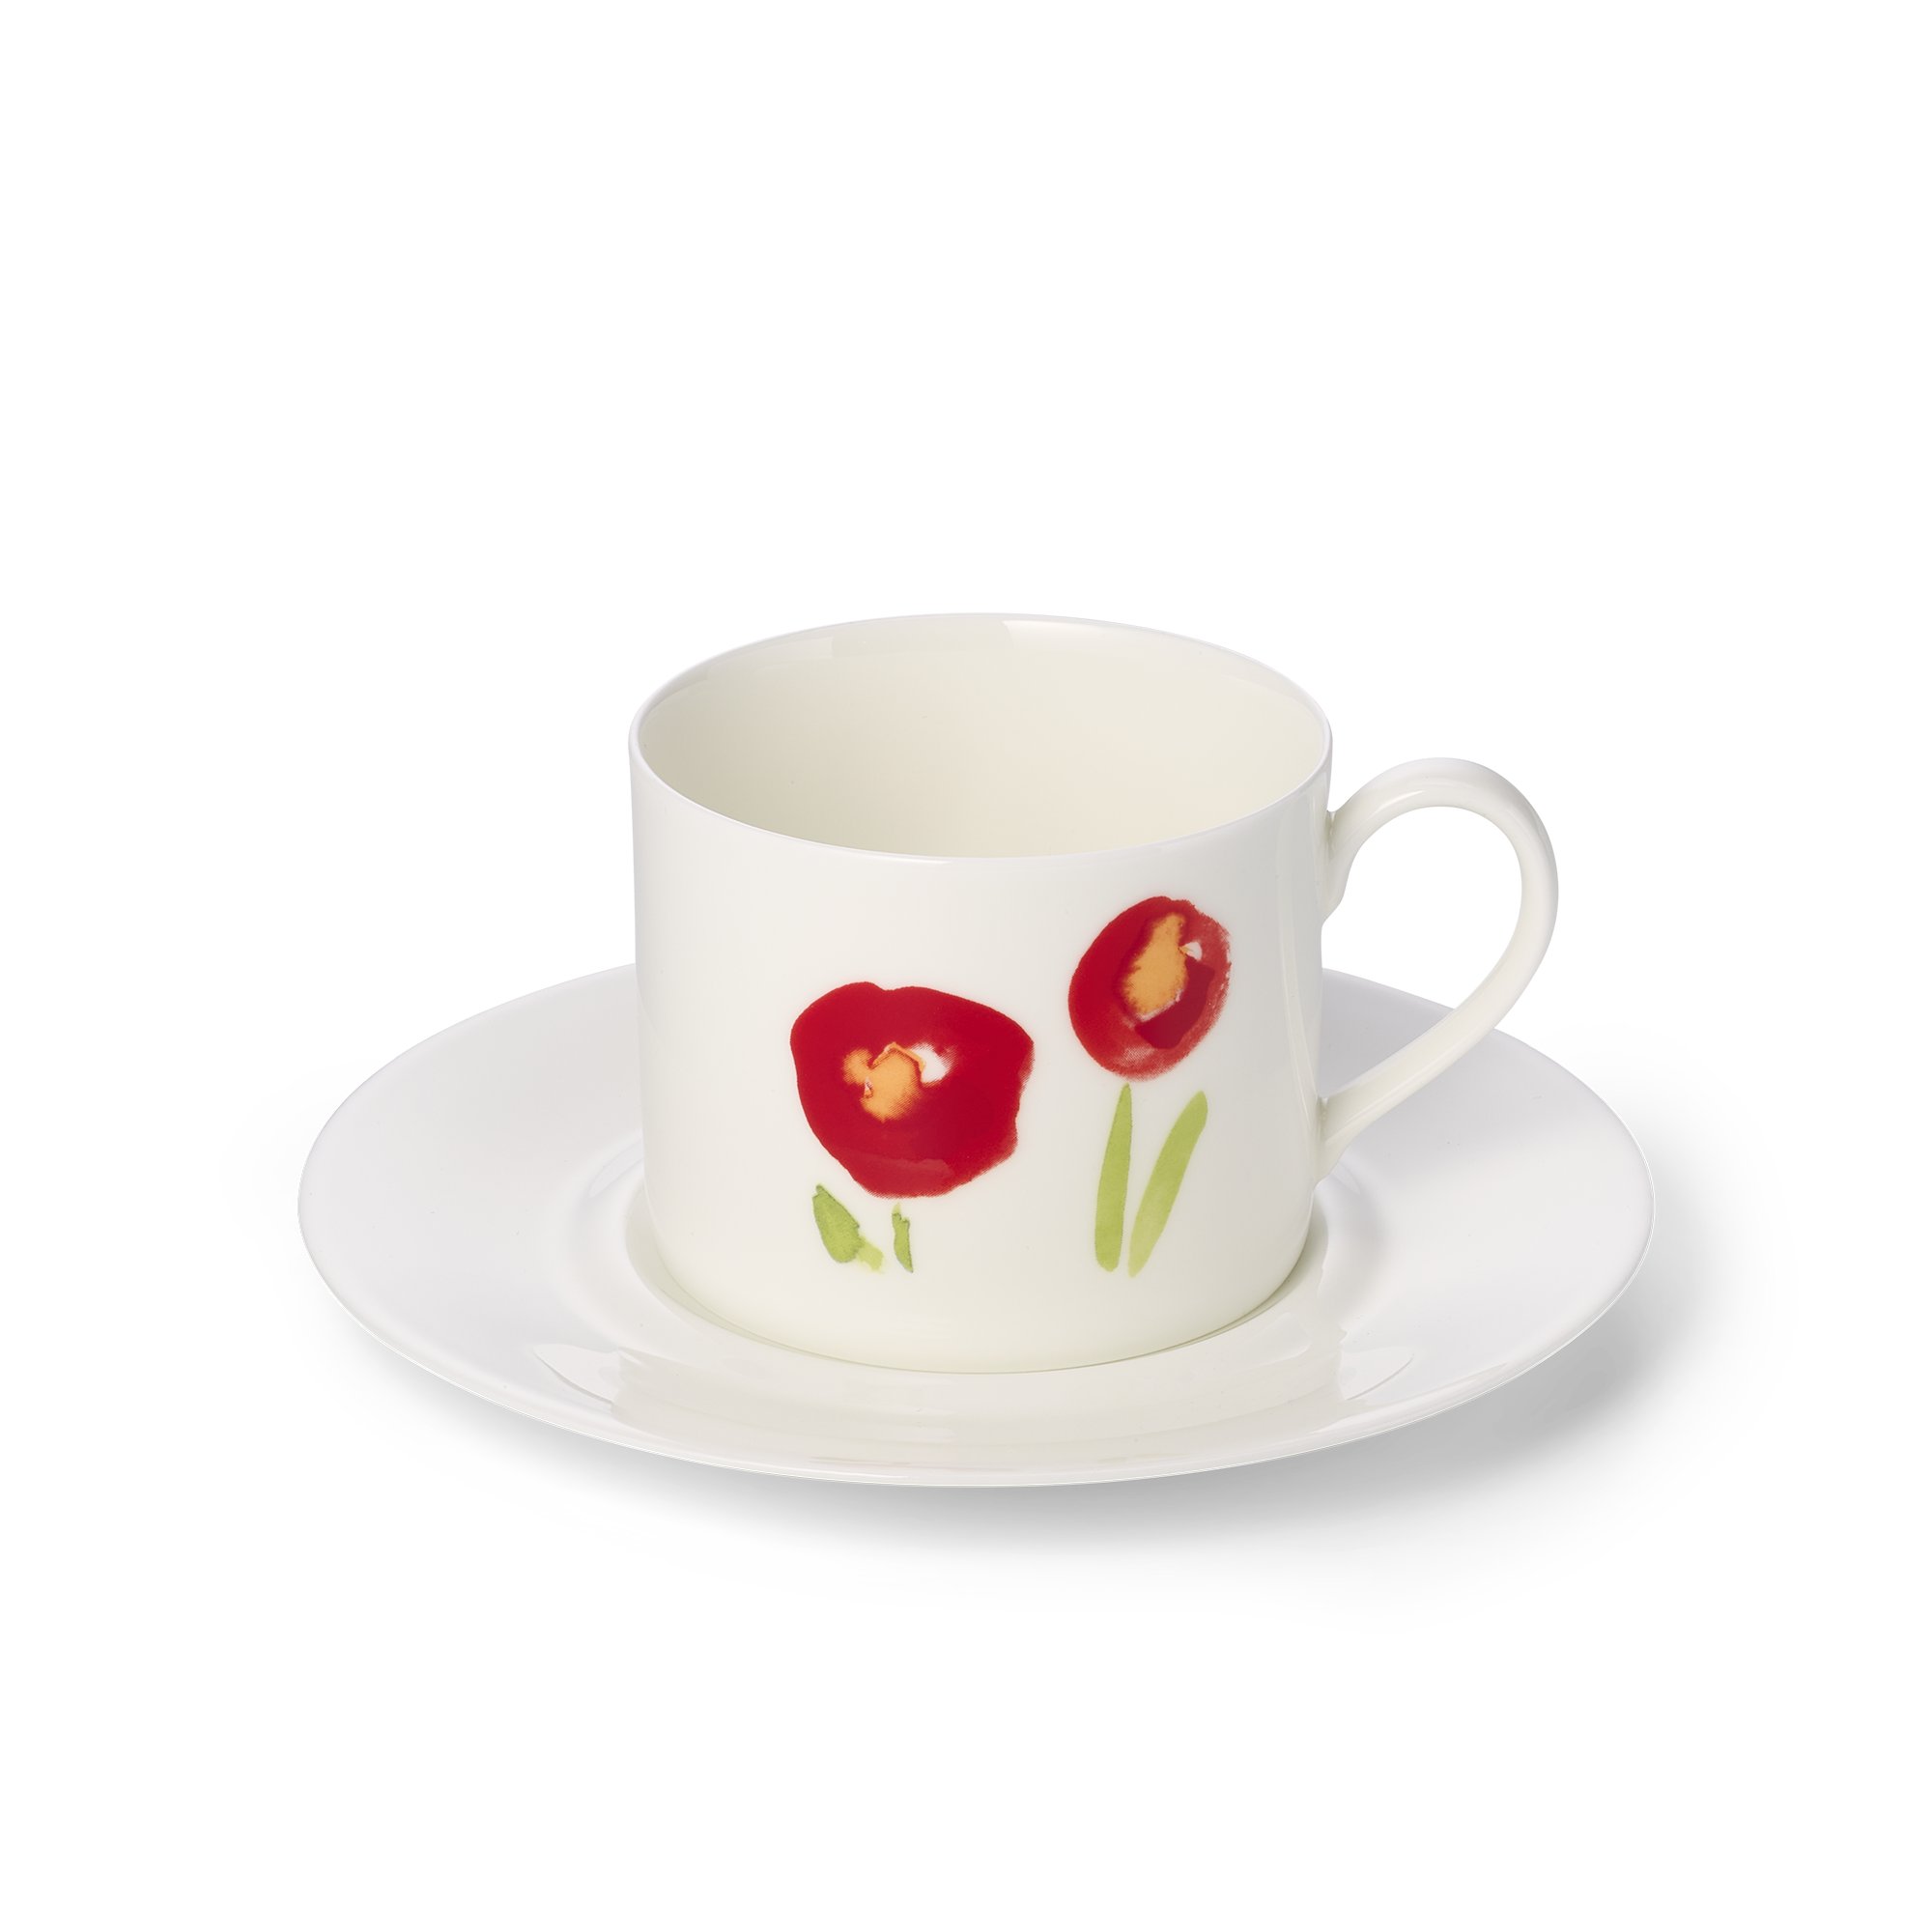 Impression poppy seed coffee cup, flat saucer